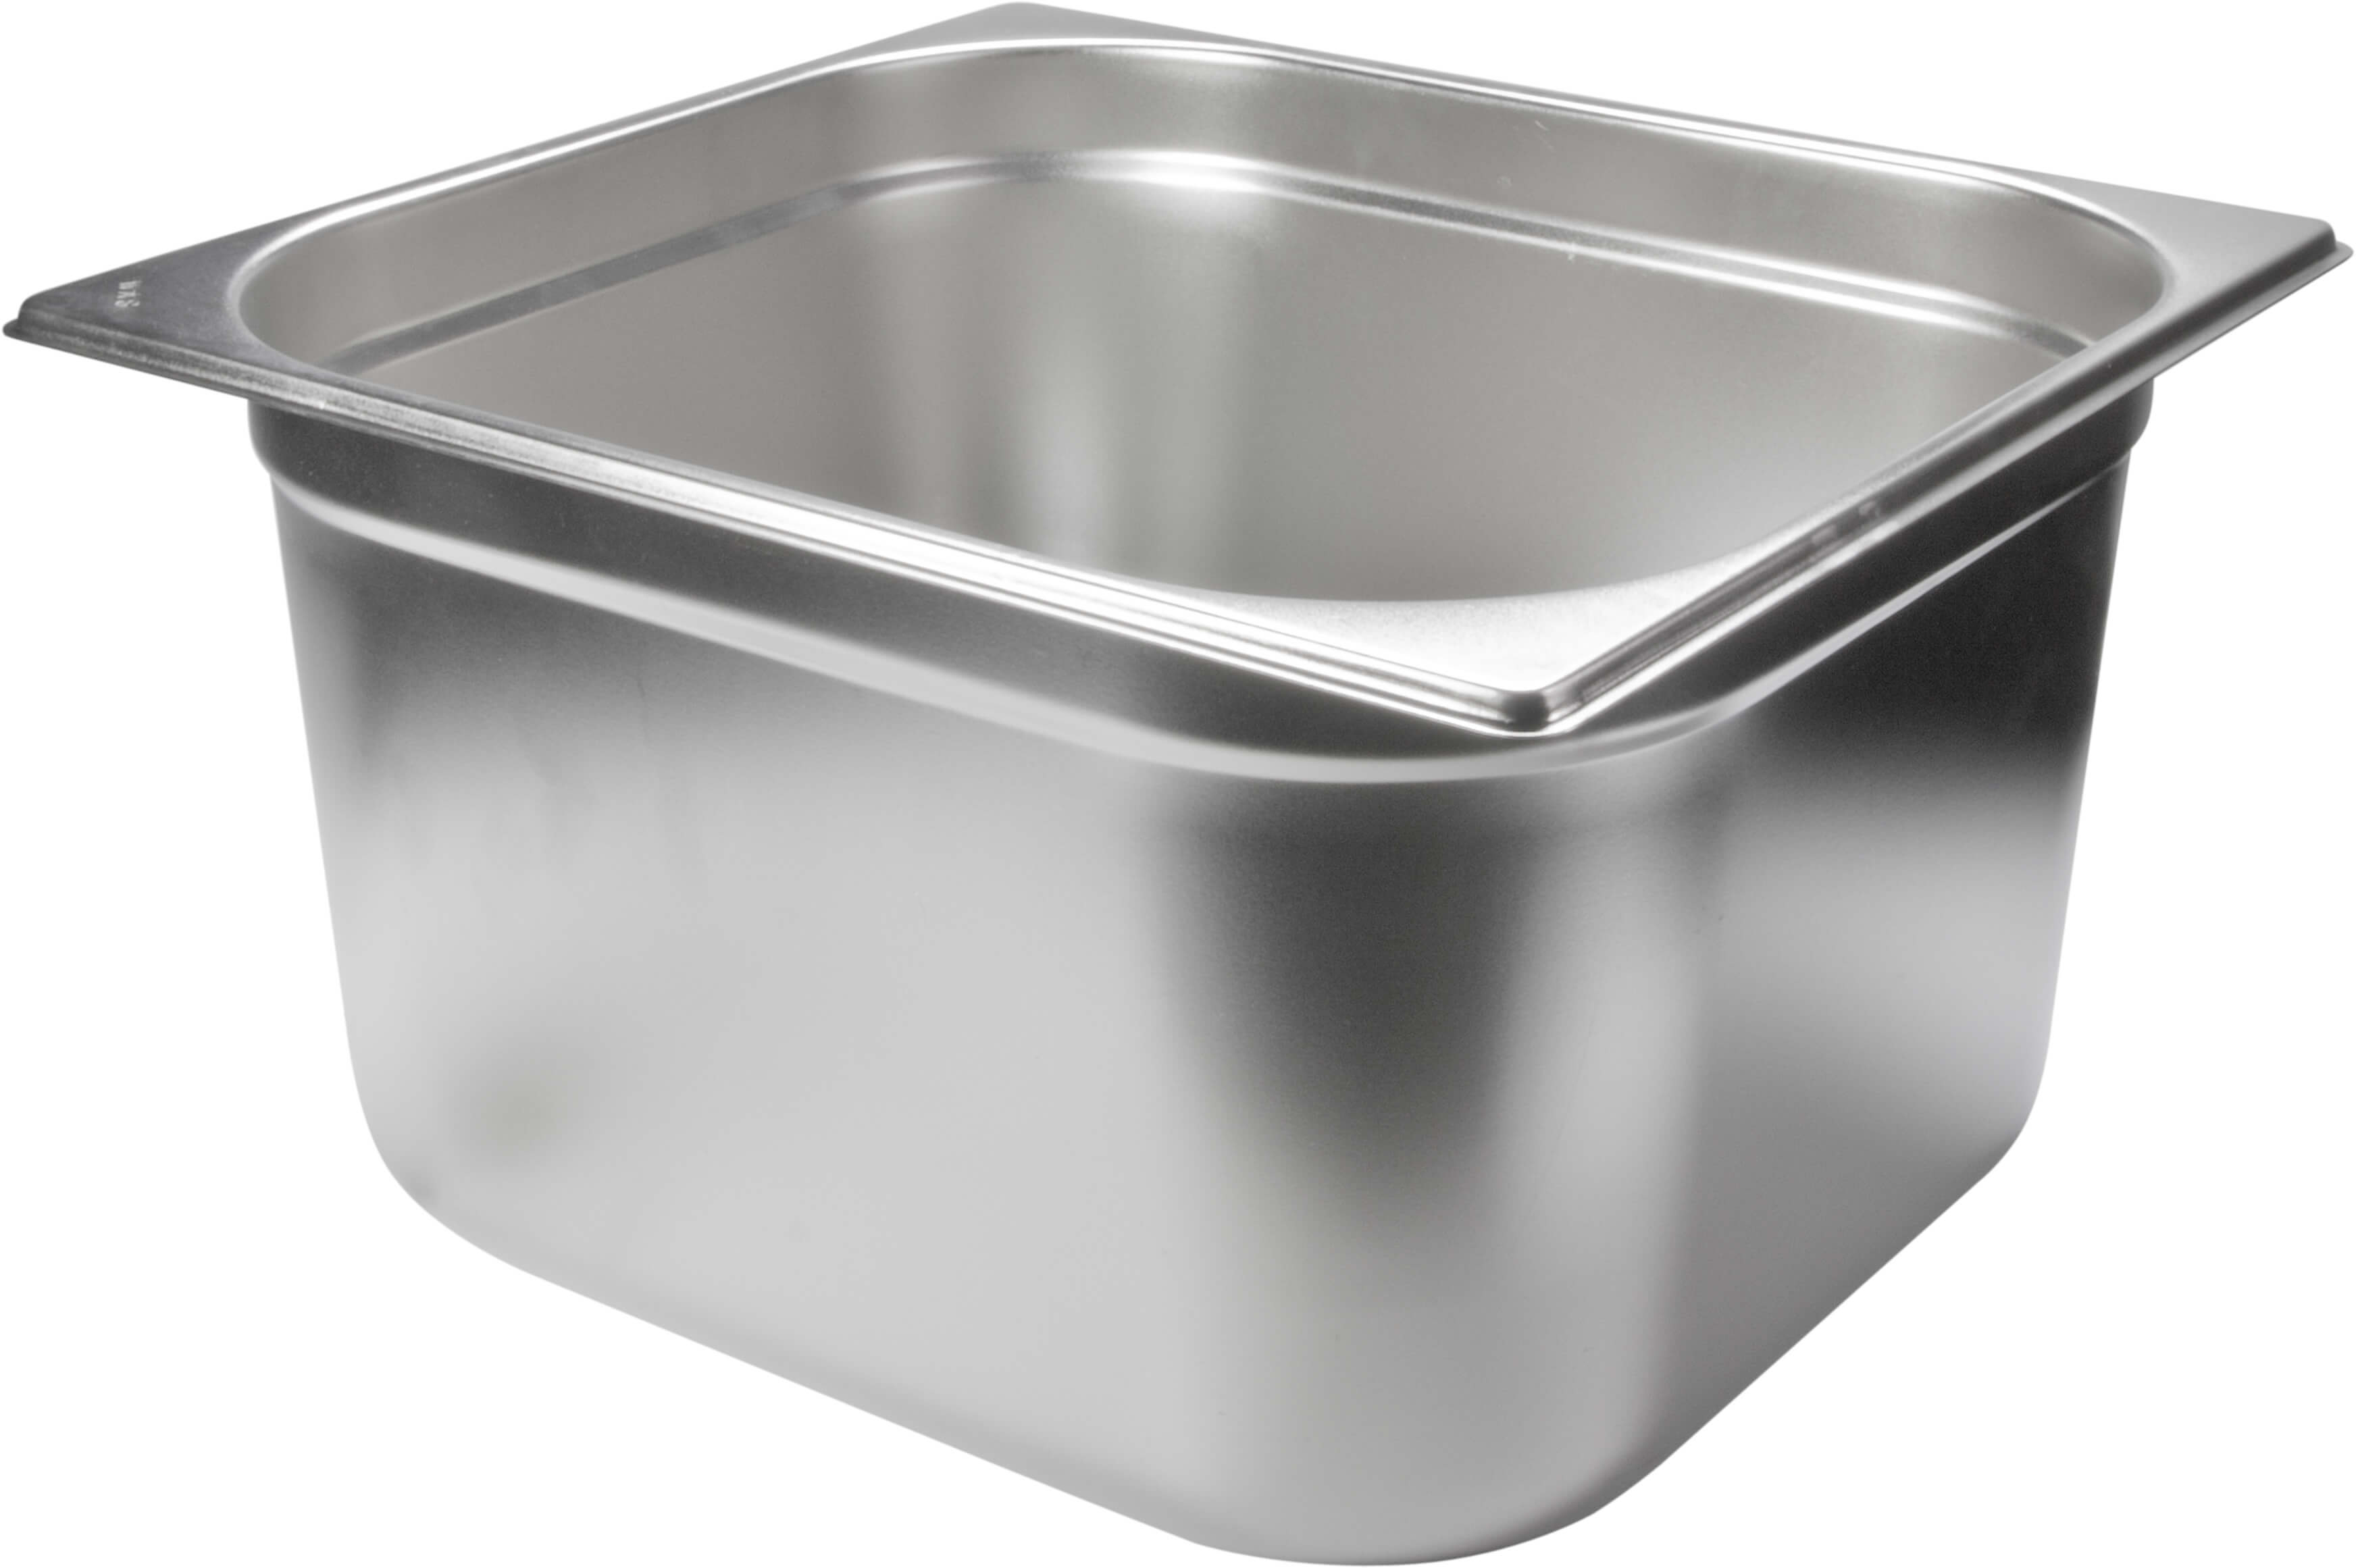 Gastronomy-standard container 200mm depth - stainless steel (GN 1/2)